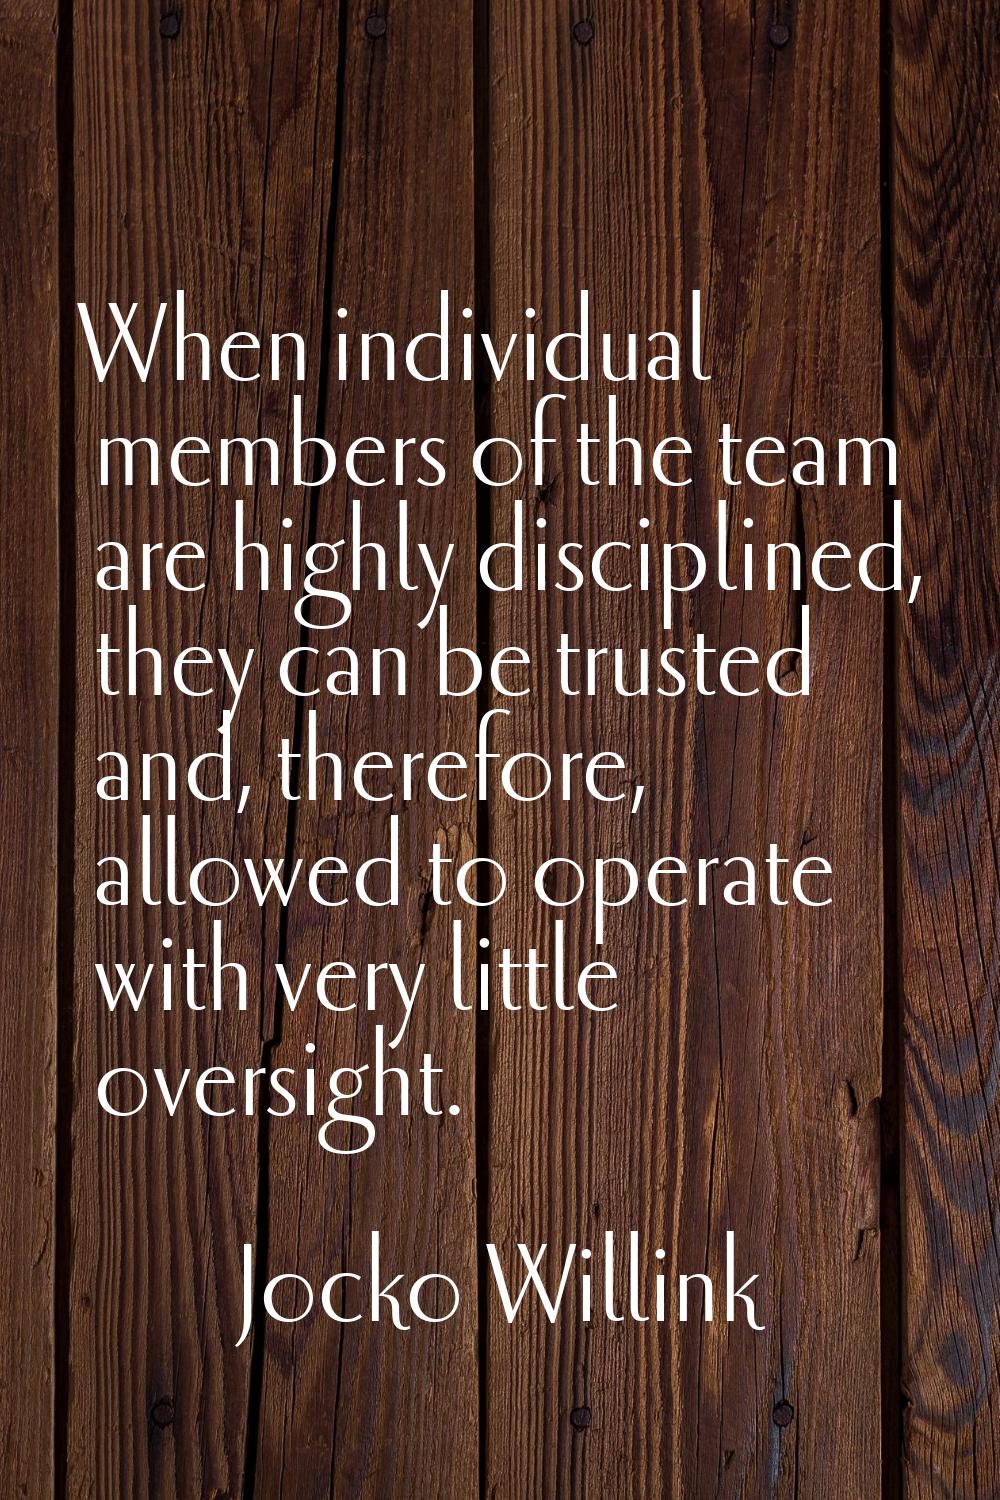 When individual members of the team are highly disciplined, they can be trusted and, therefore, all